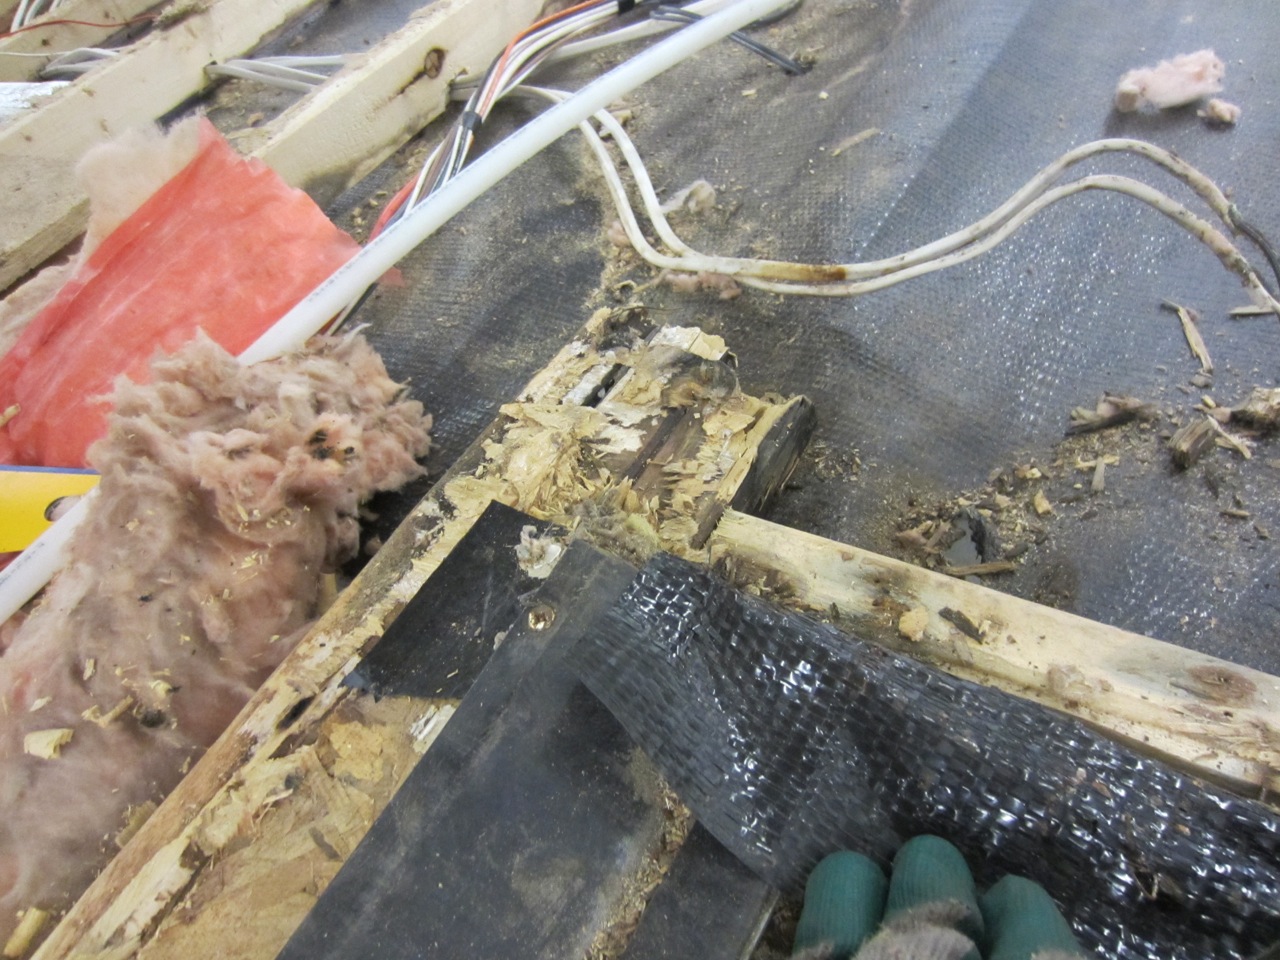  The floor joists are a mess from pieces of sub-floor boards that didn't fully come off. 